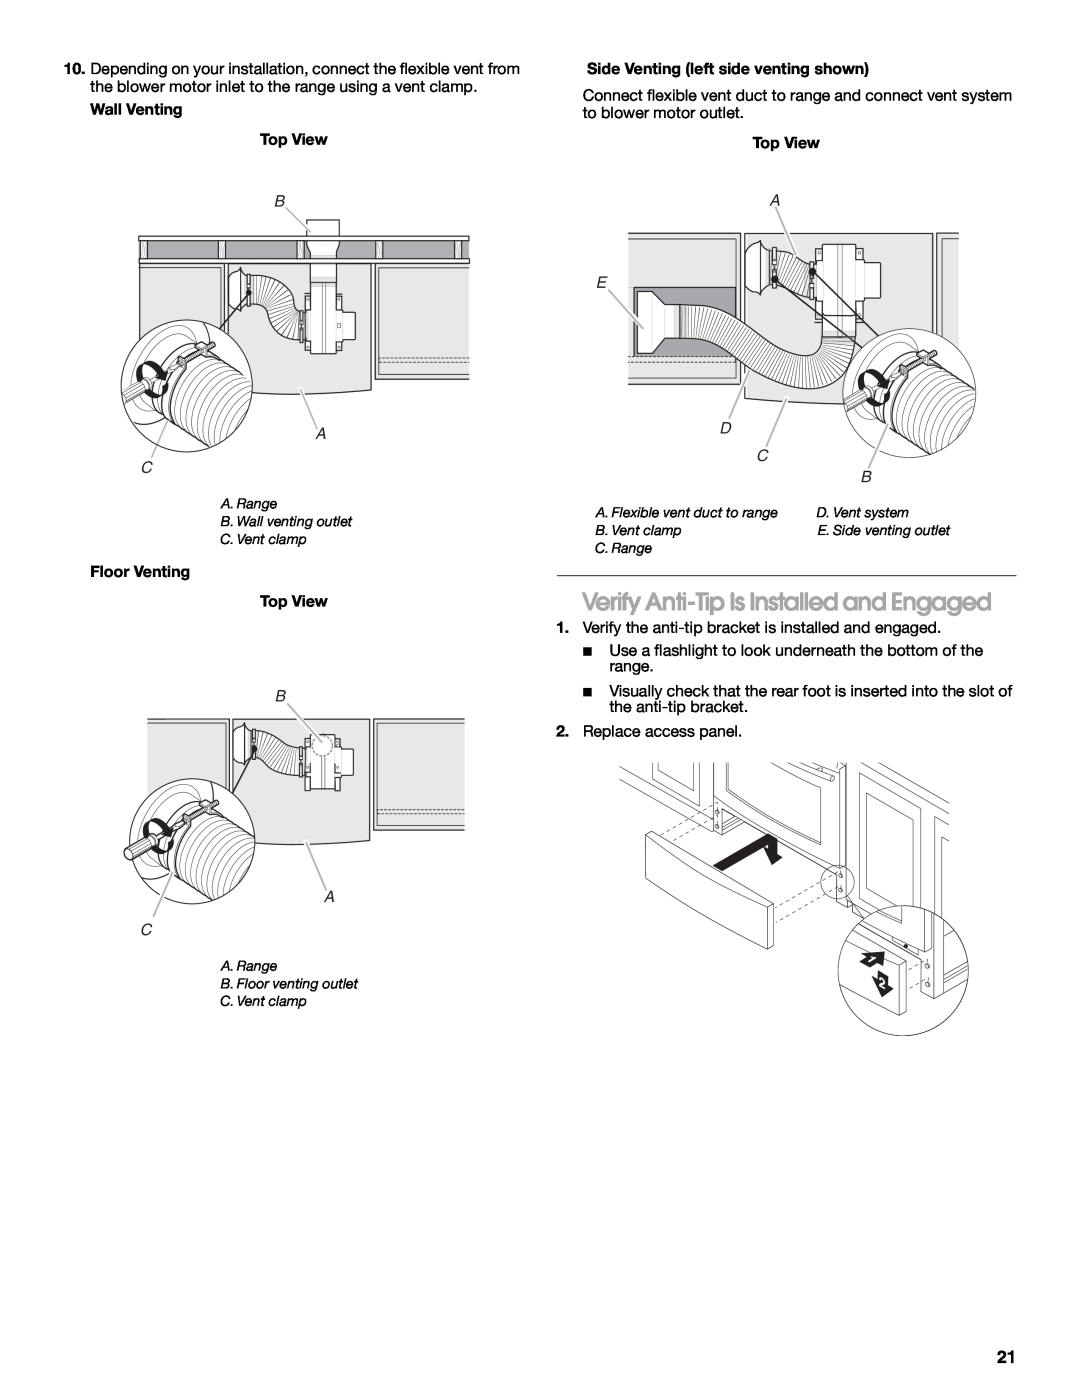 Jenn-Air W10430955A Verify Anti-TipIs Installed and Engaged, B A C, Wall Venting Top View, Floor Venting Top View 